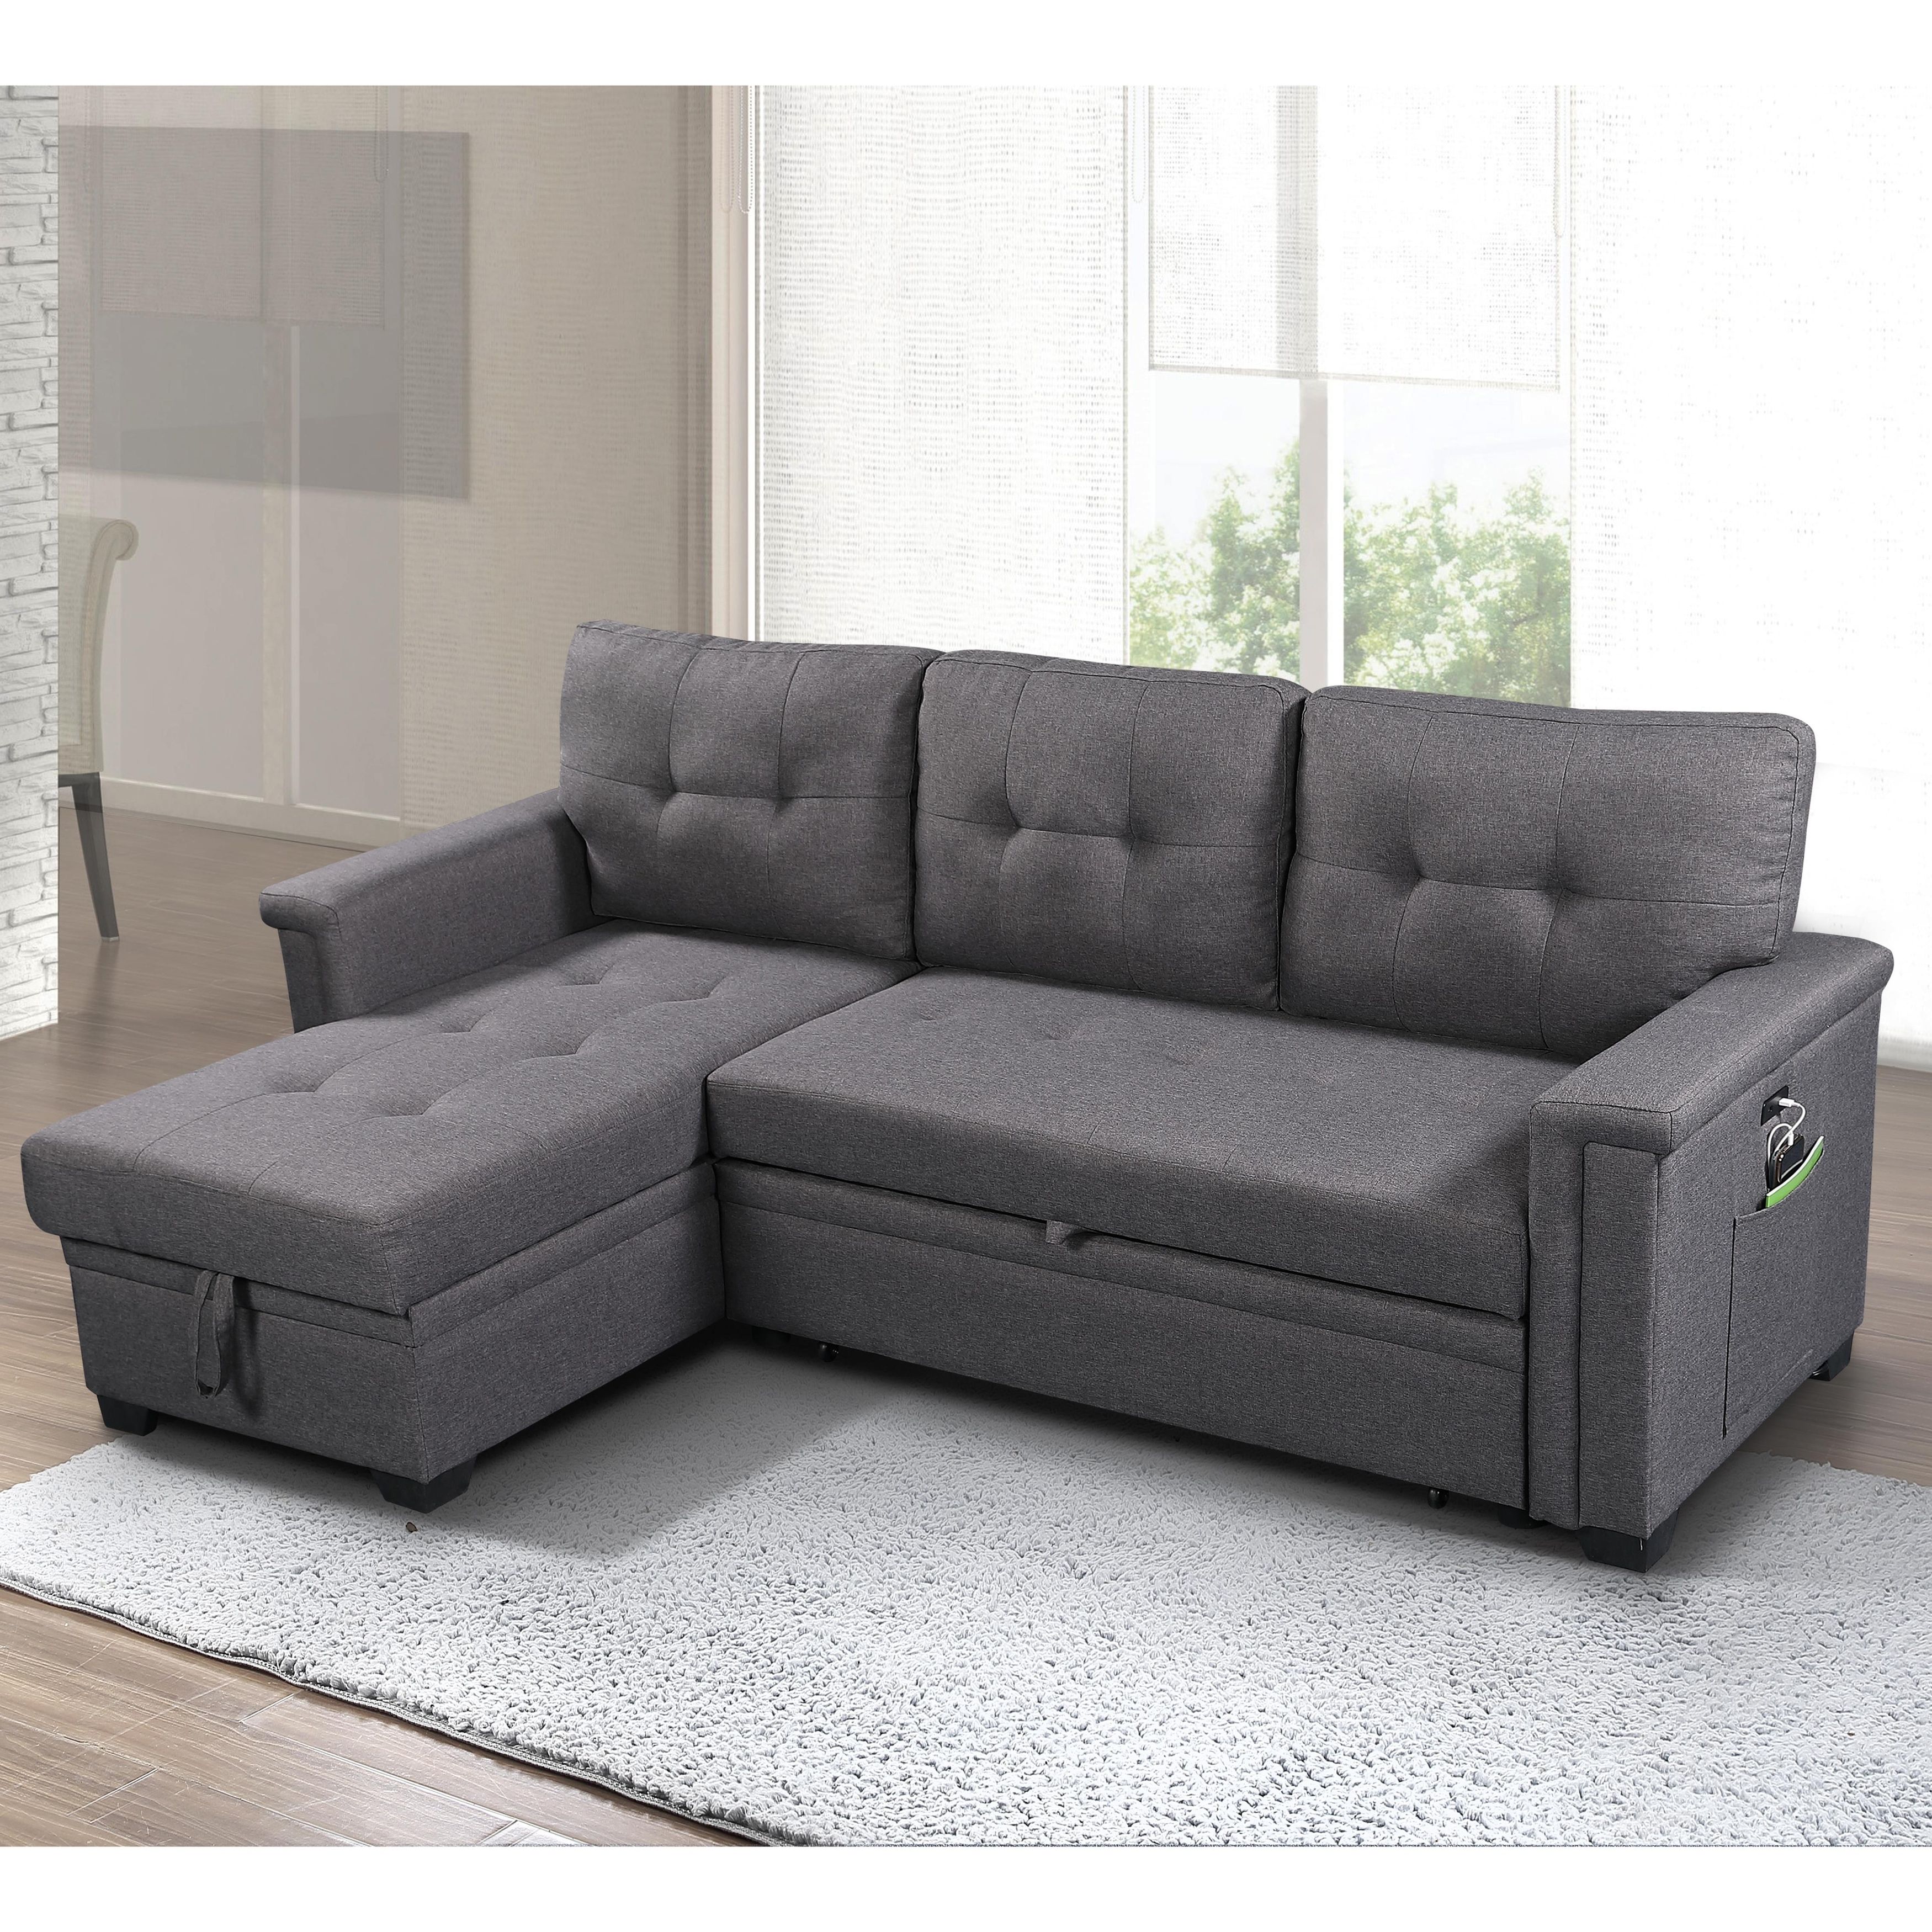 Ashlyn Reversible Sleeper Sofa With Storage Chaise – On Sale – – 30144937 With Regard To Convertible Sofa With Matching Chaise (Gallery 5 of 20)